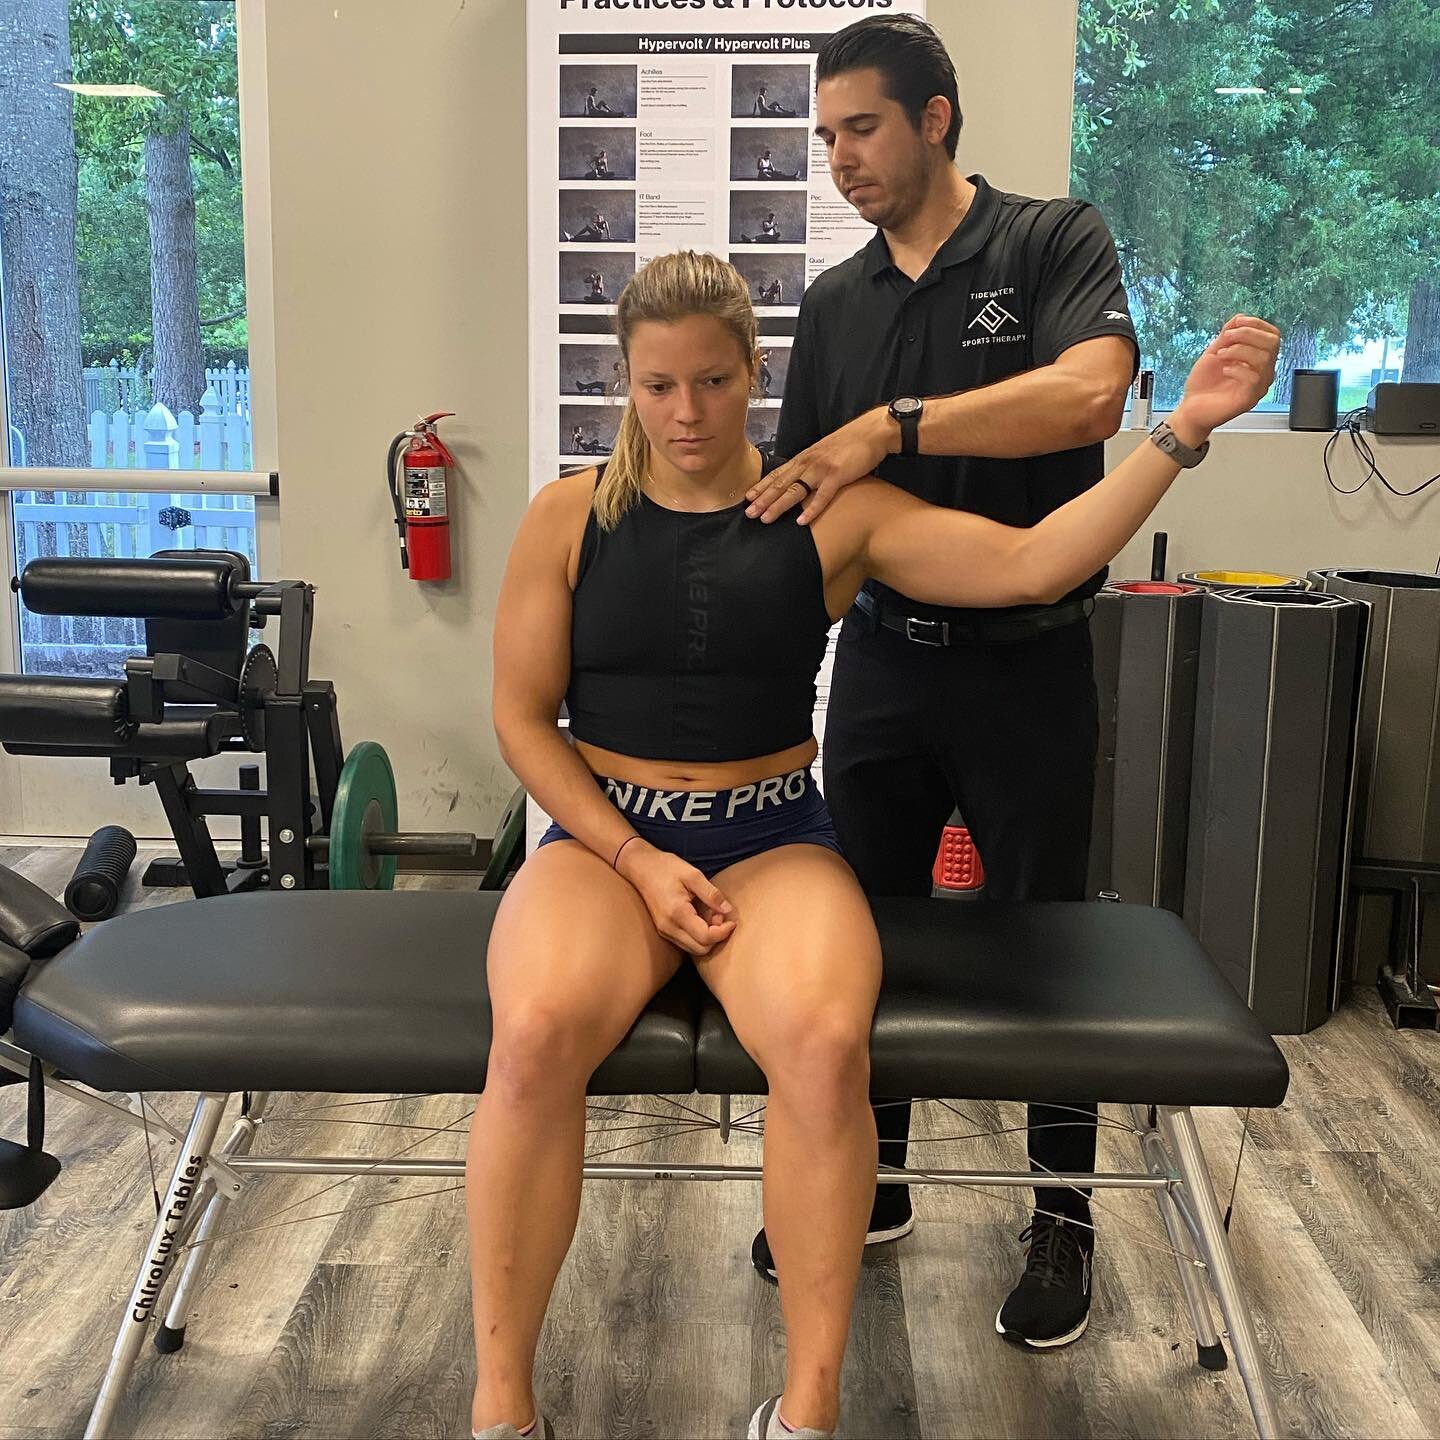 If you can&rsquo;t tell I enjoy working with @crossfit athletes! Helping @laurahorvaht get ready for the @crossfitgames and will be cheering her on along with the @crossfitkrypton @krypton.athletics crew. #tidewatersportstherapy #crossfitkrypton #cro